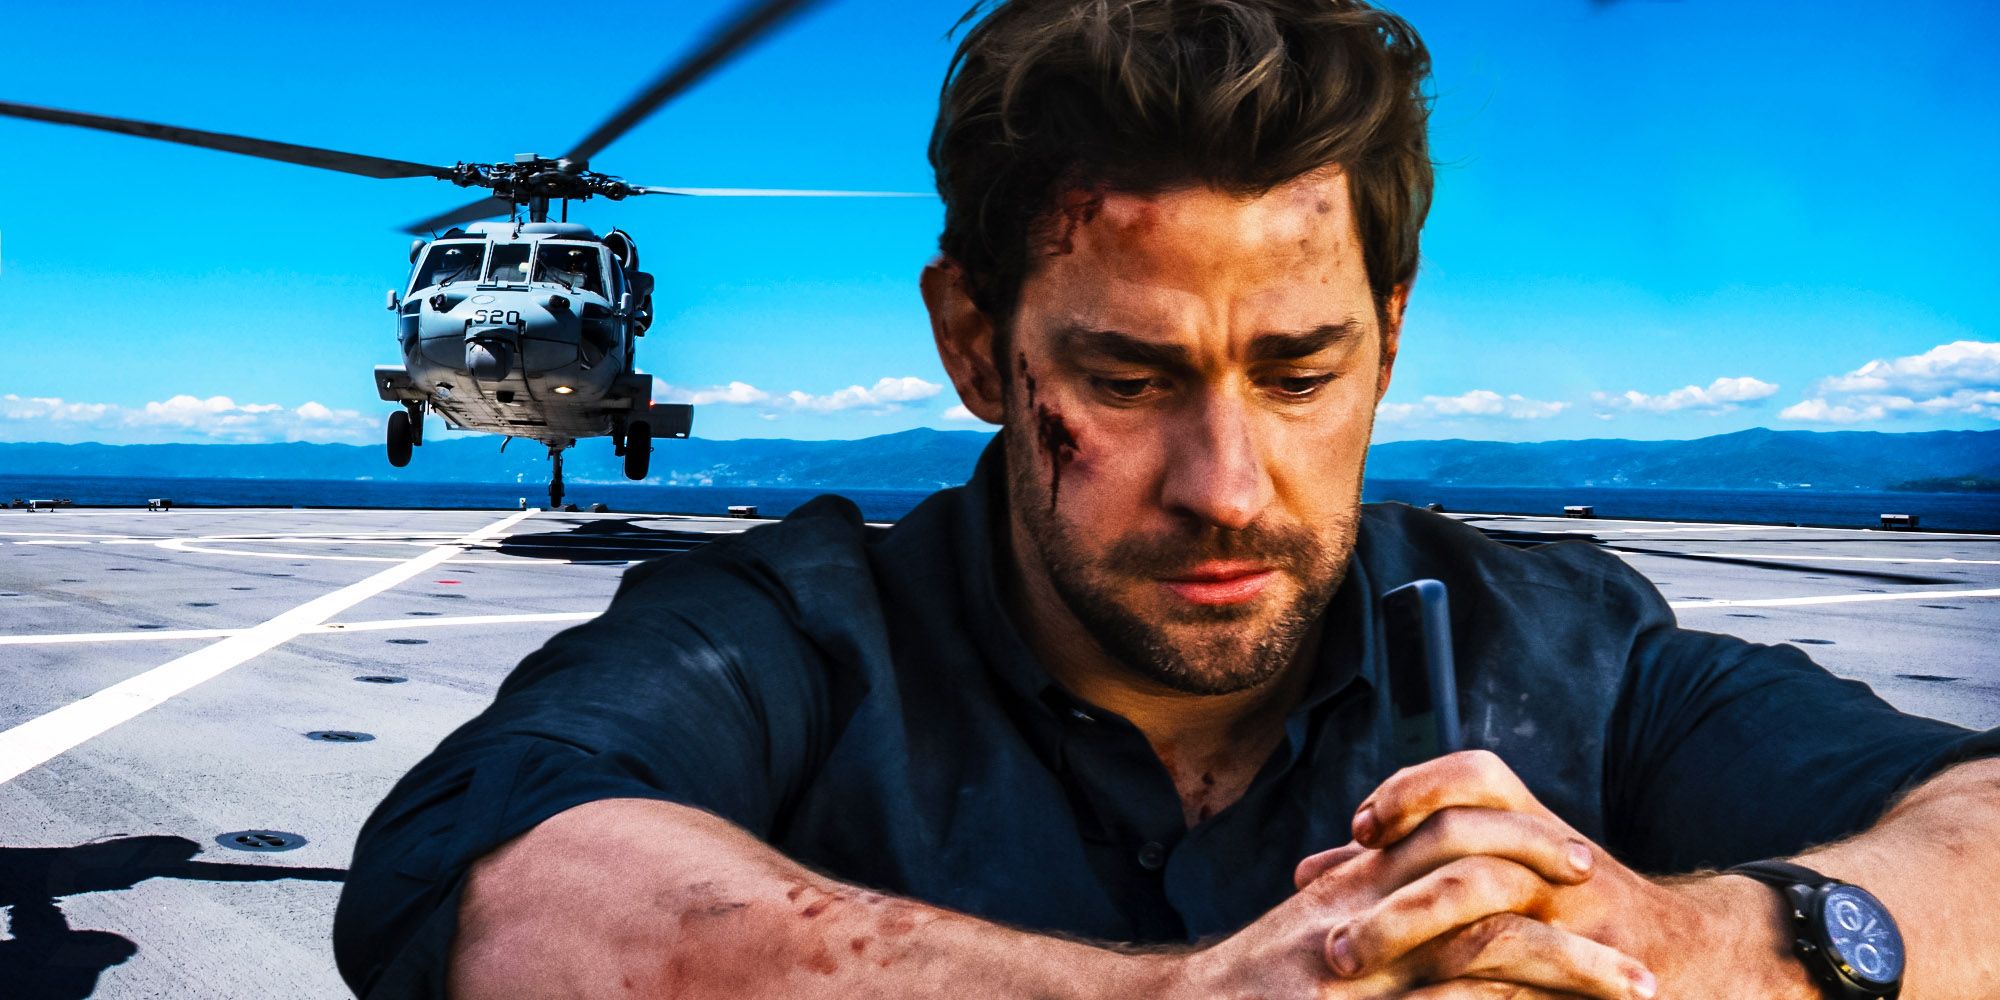 Amazon Cut A Famous Jack Ryan Personality Trait From The TV Show